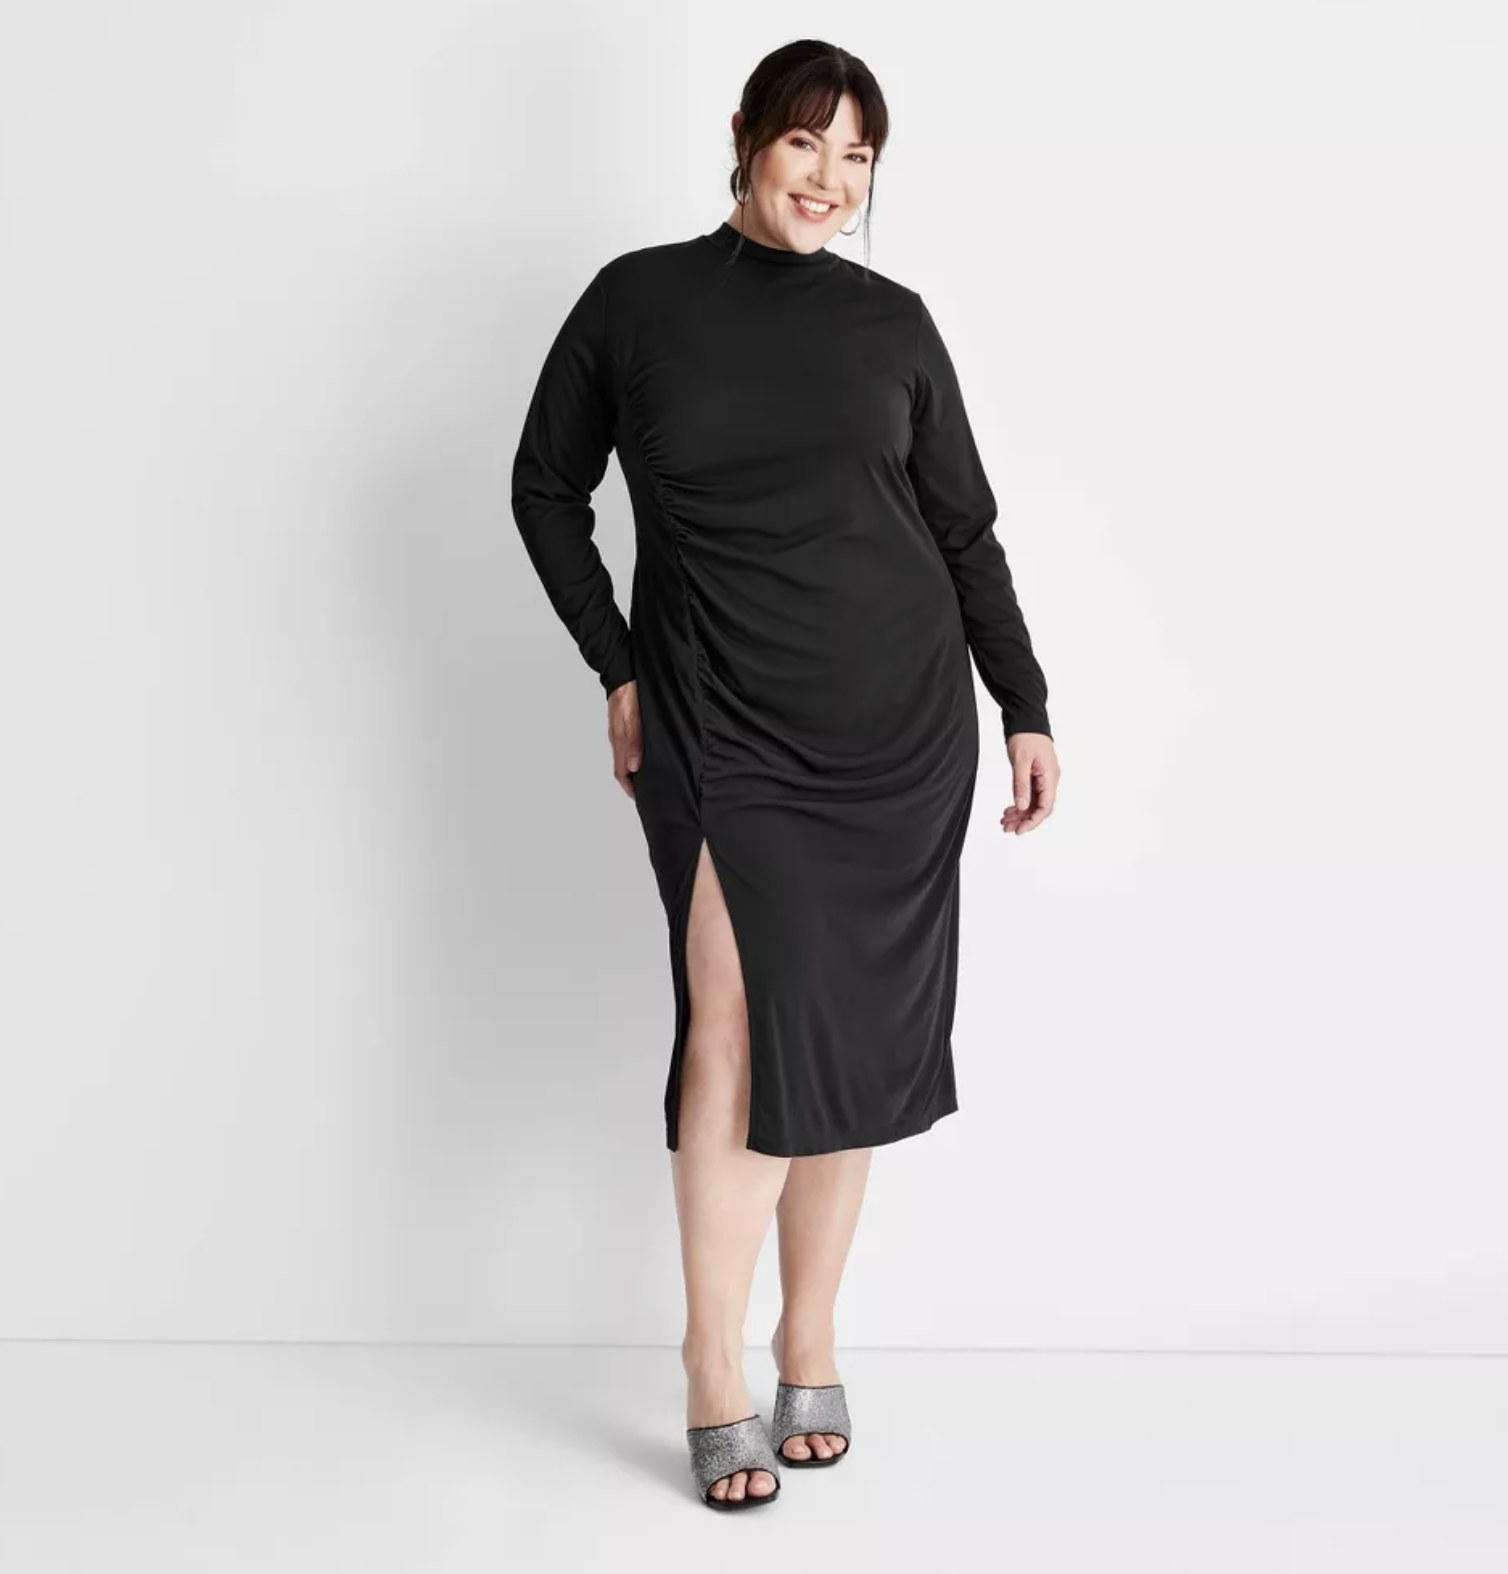 The ruched black dress